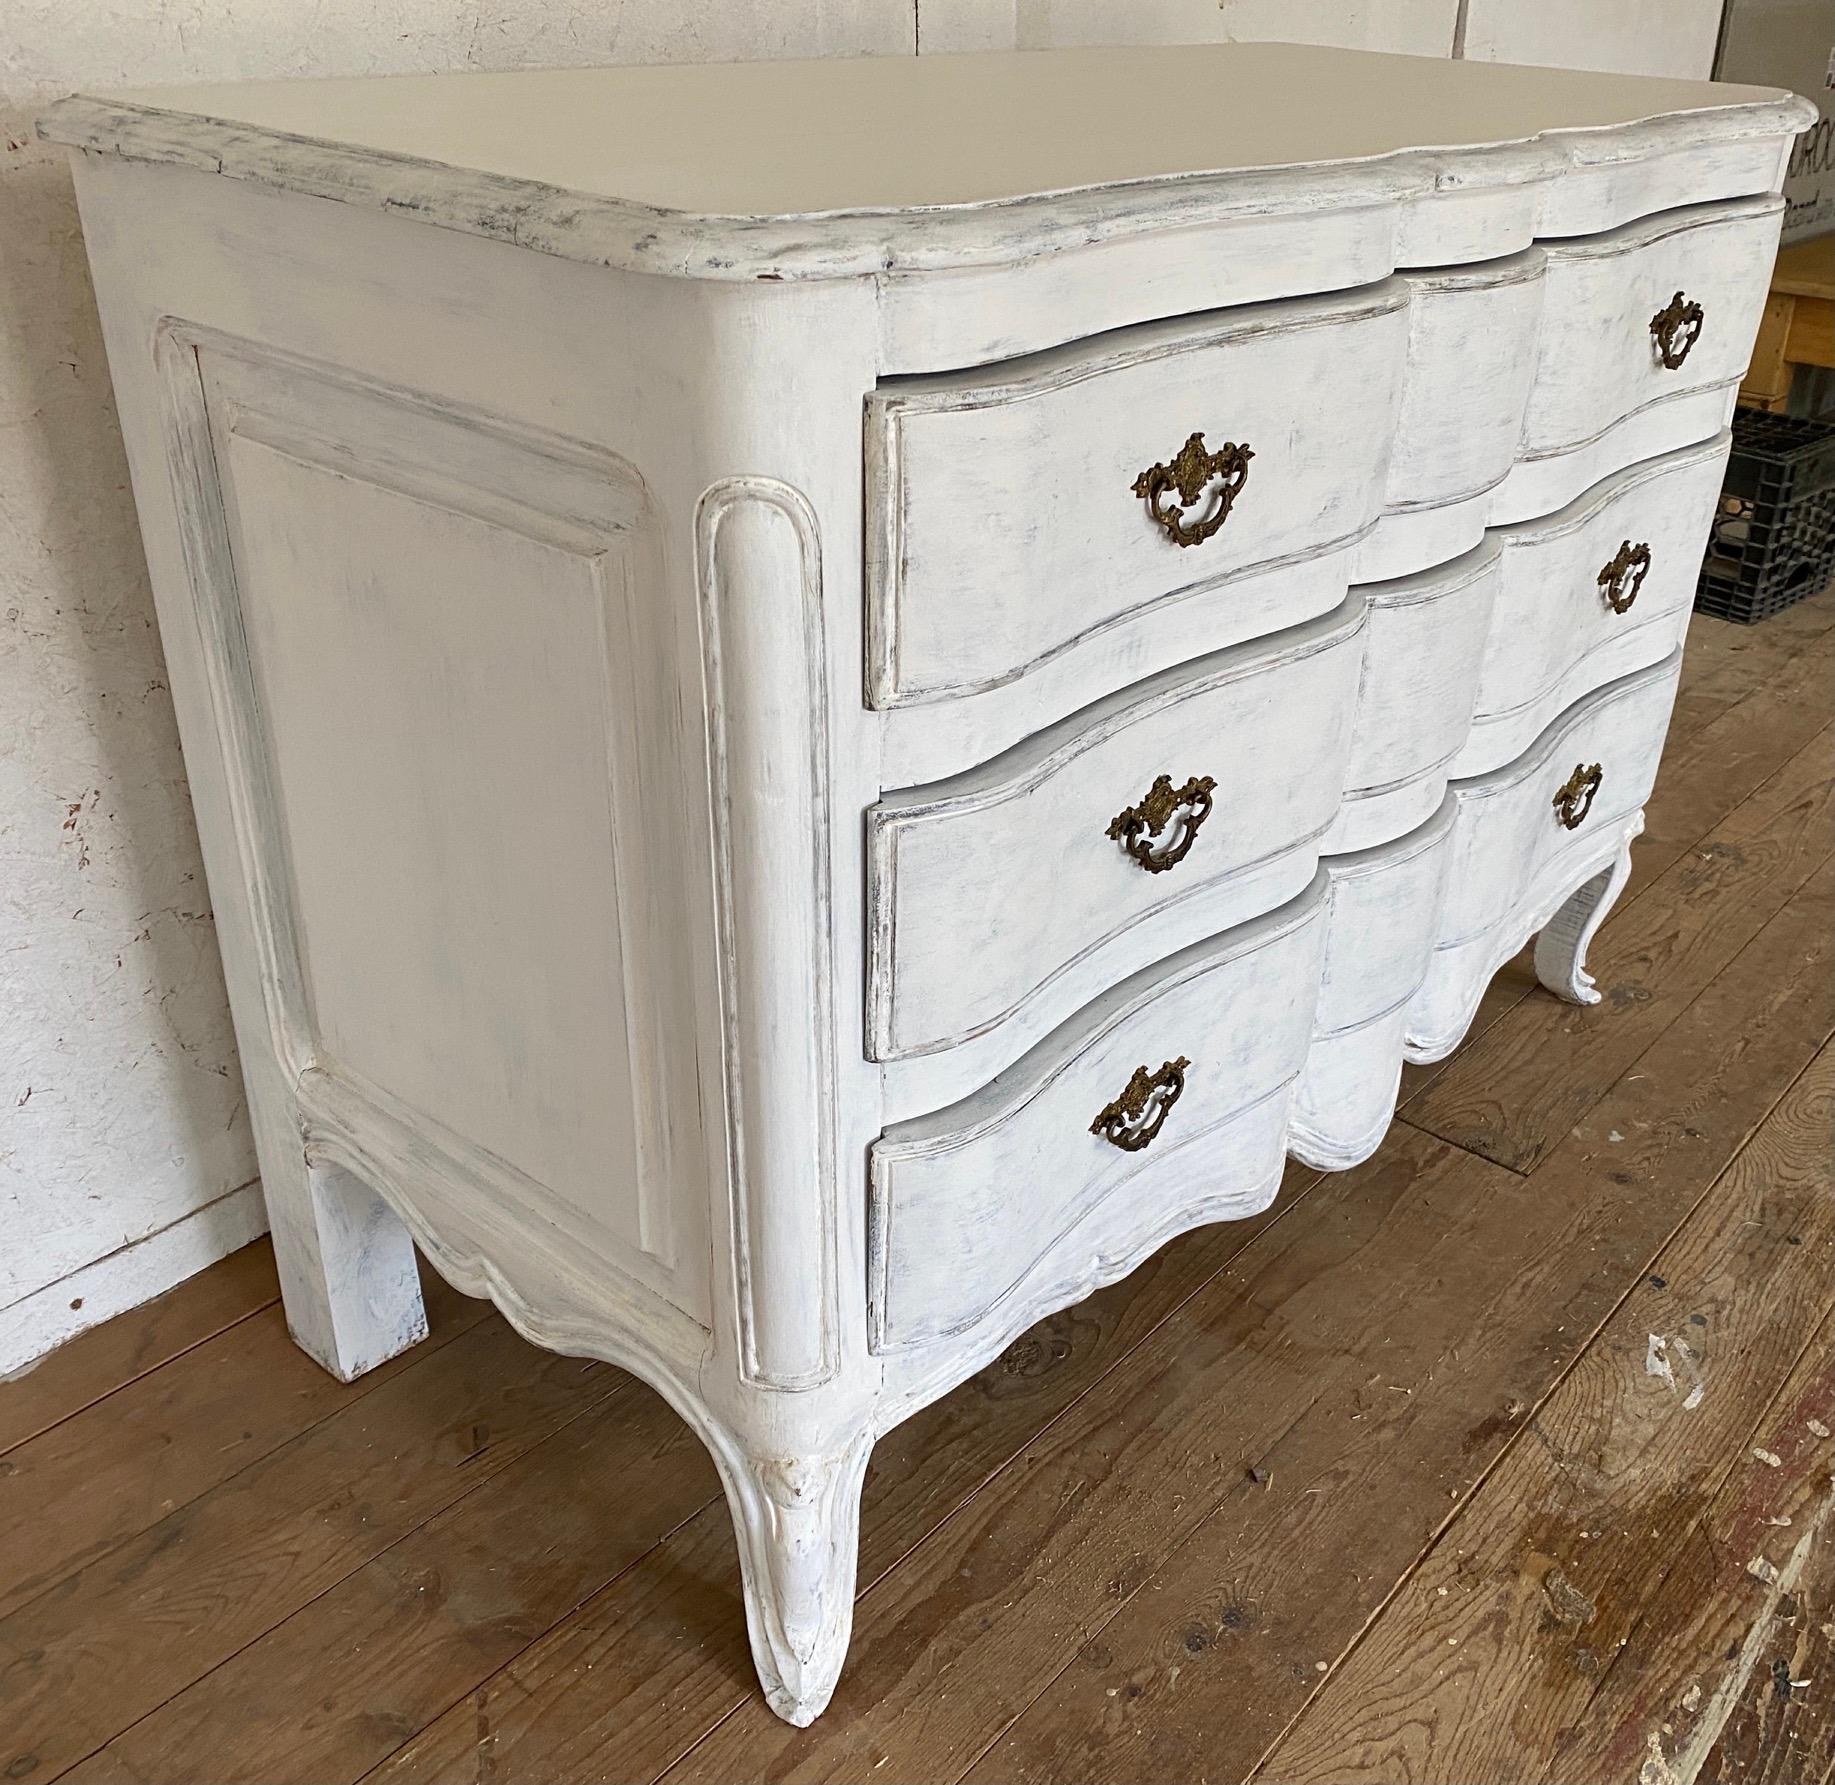 Louis XV Provincial style painted commode or chest of drawers with wonderful details. Painted wood with trim detailed, decorative hardware.